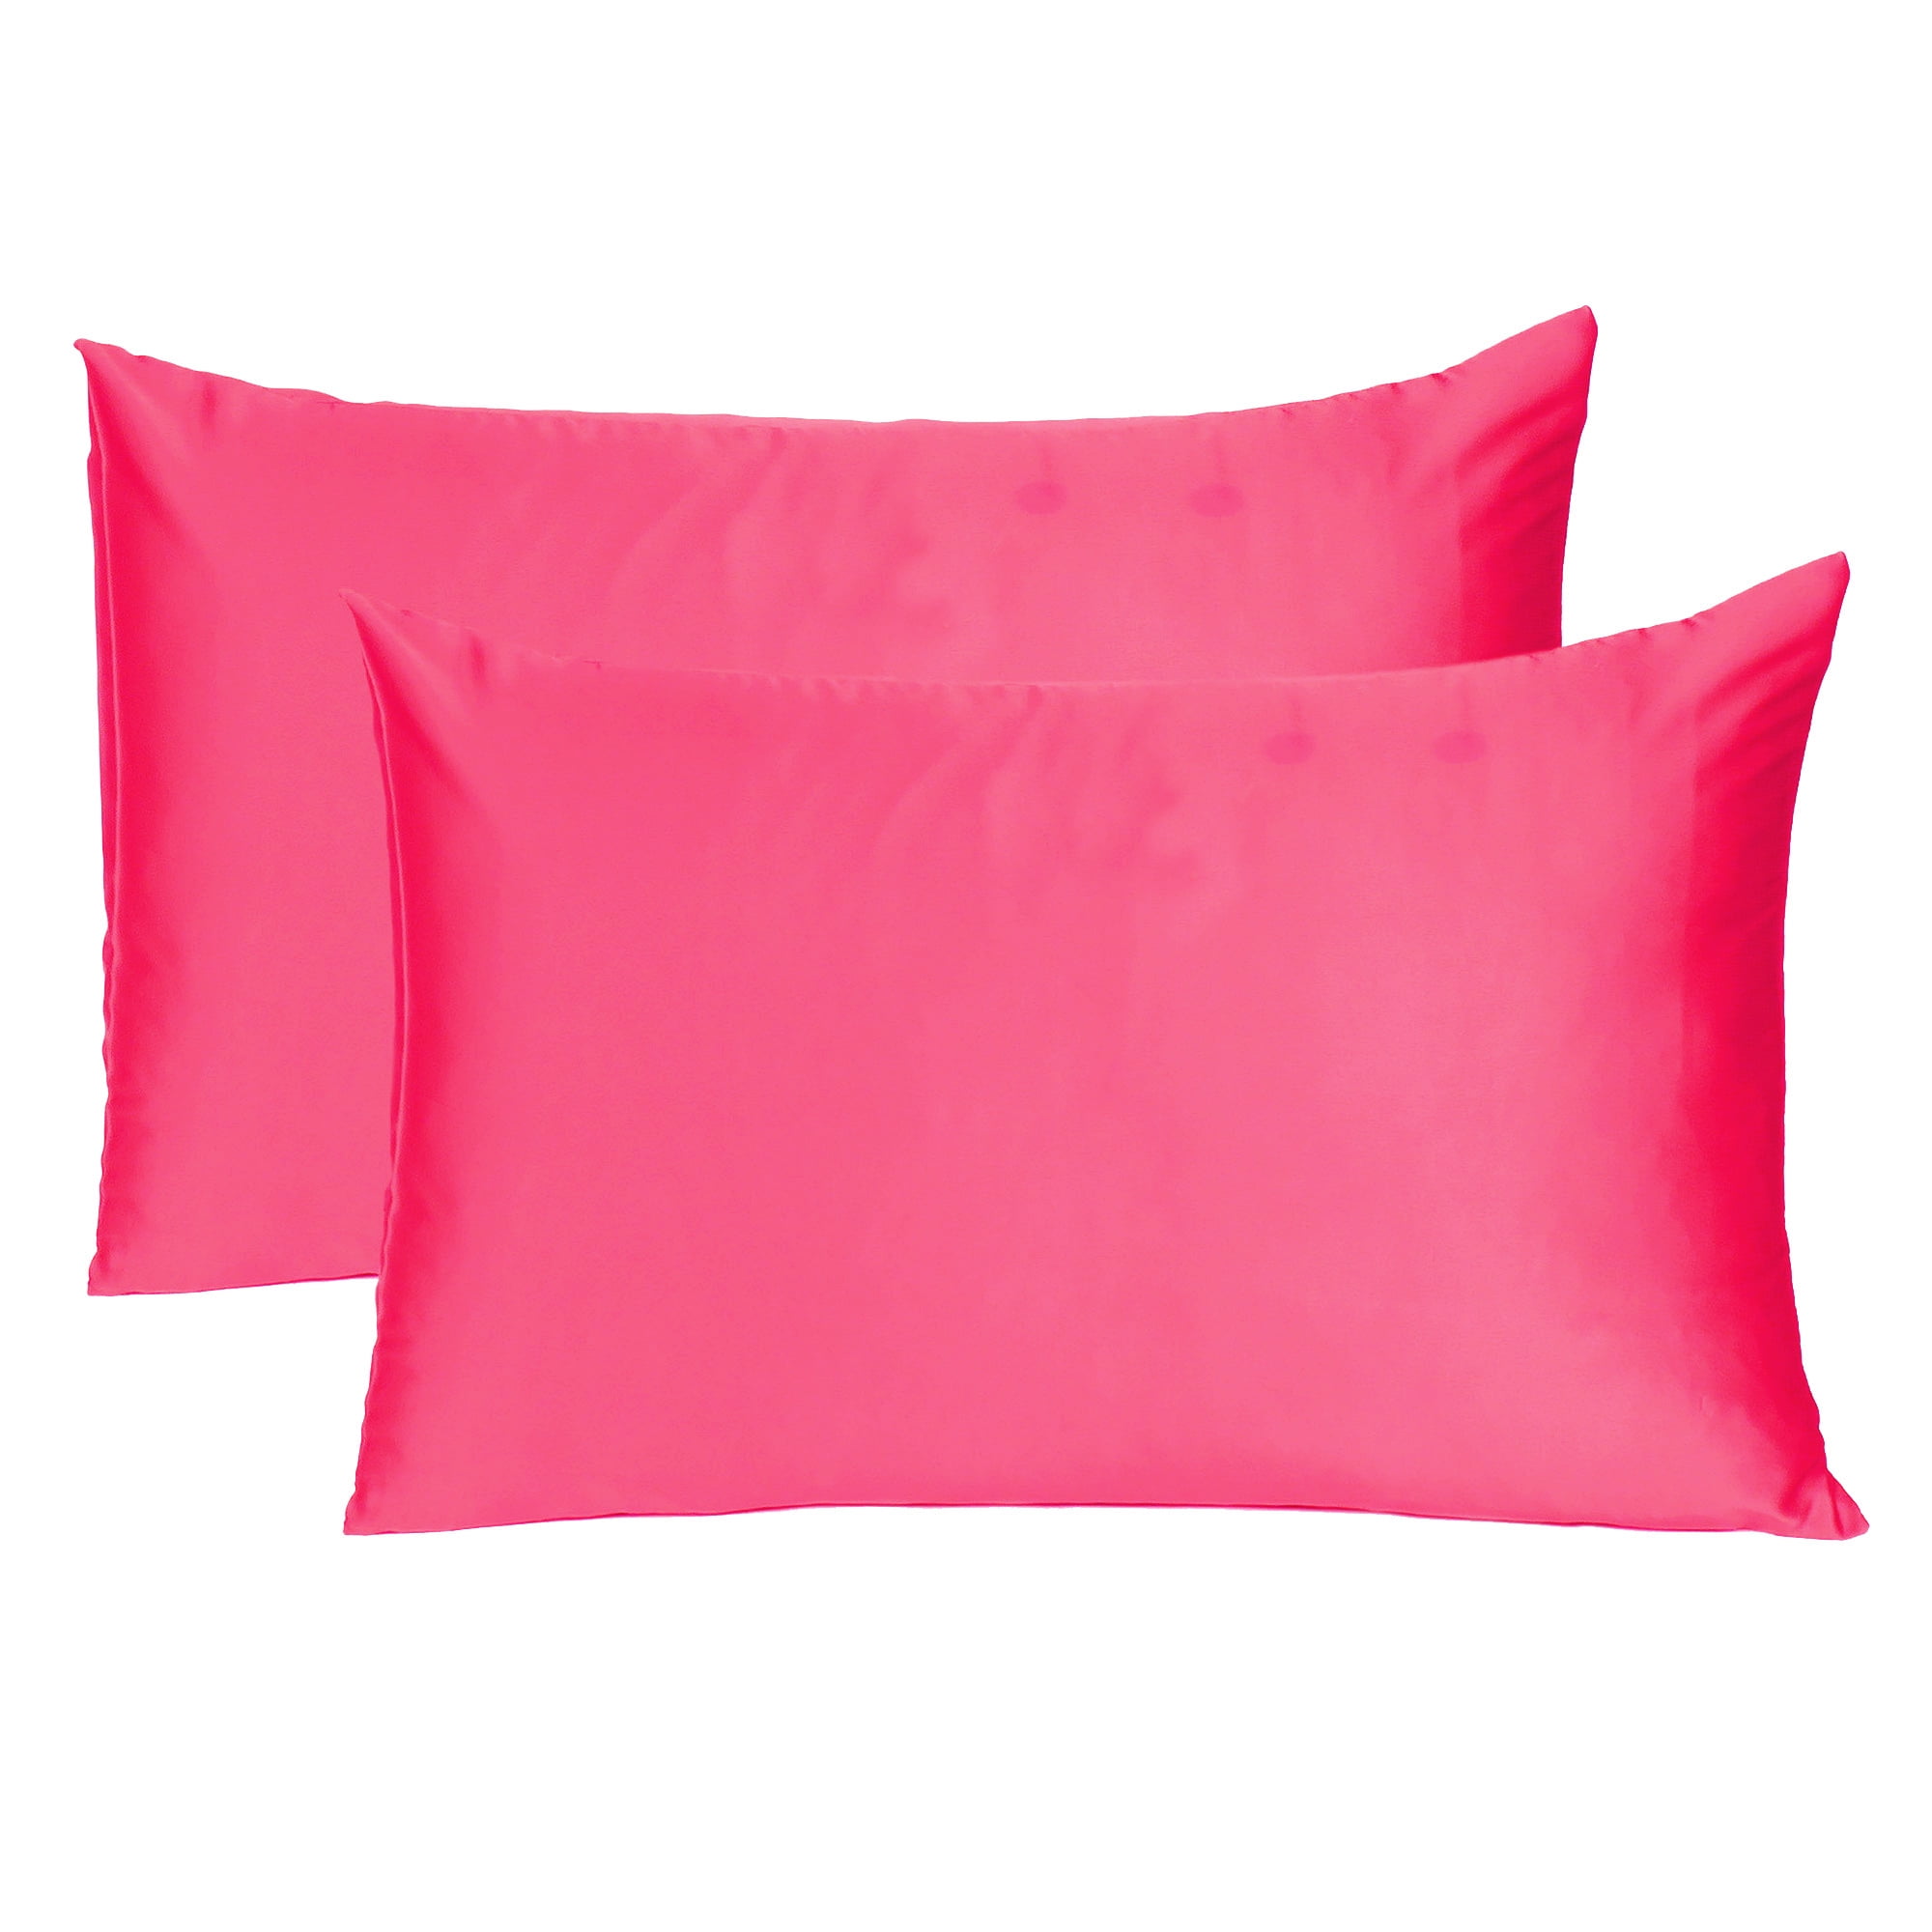 Solid Satin Standard Pillow Case Cushion Cover Bedding Pillowcase For Bedroom 